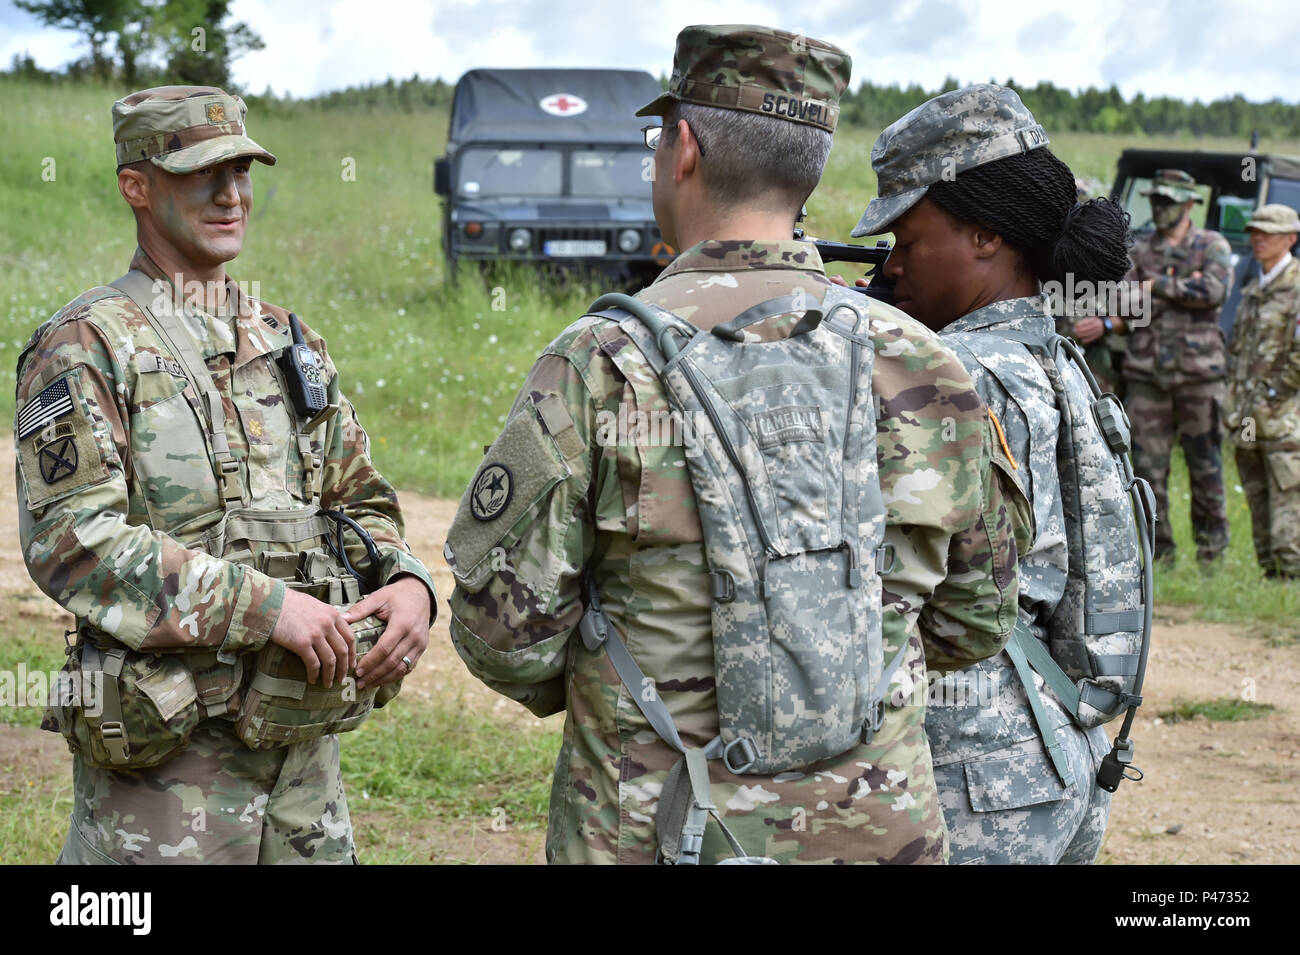 (From left to right) U.S. Army Maj. James Falcon, a surgeon with the 1st Brigade Combat Team, 82nd Airborne Division, answers questions to U.S. Army Staff Sgt. Mark Scovell and U.S. Army Sgt. Marline Duncon, both with 100th Mobile Public Affairs Detachment, during Exercise Swift Response 16, June 16, 2016 in Hohenfels, Germany. Exercise Swift Response is one of the premier military crisis response training events for multi-national airborne forces in the world. The exercise is designed to enhance the readiness of the combat core of the U.S. Global Response Force - currently the 82nd Airborne D Stock Photo